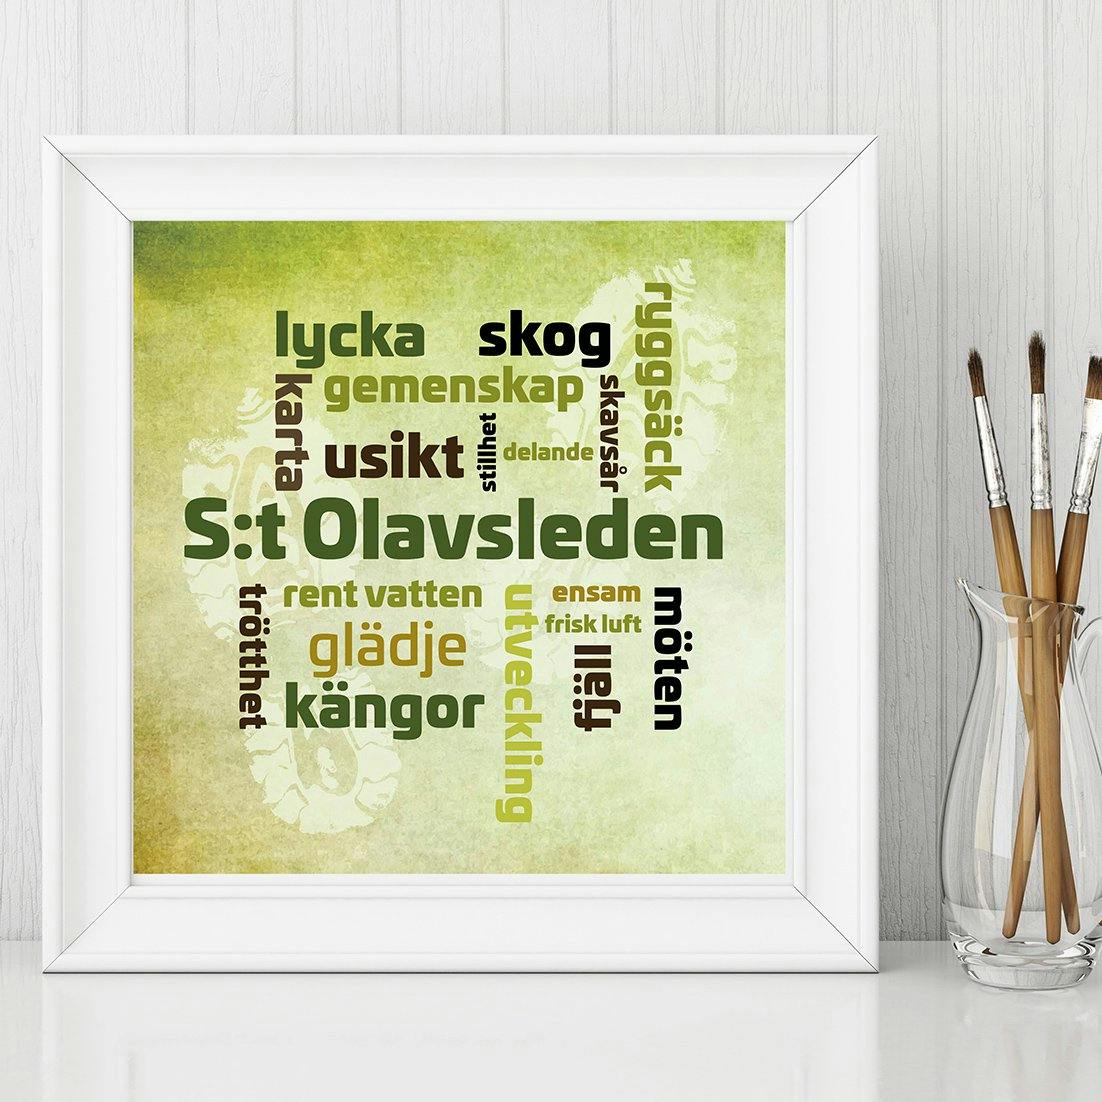 Poster, only in Swedish